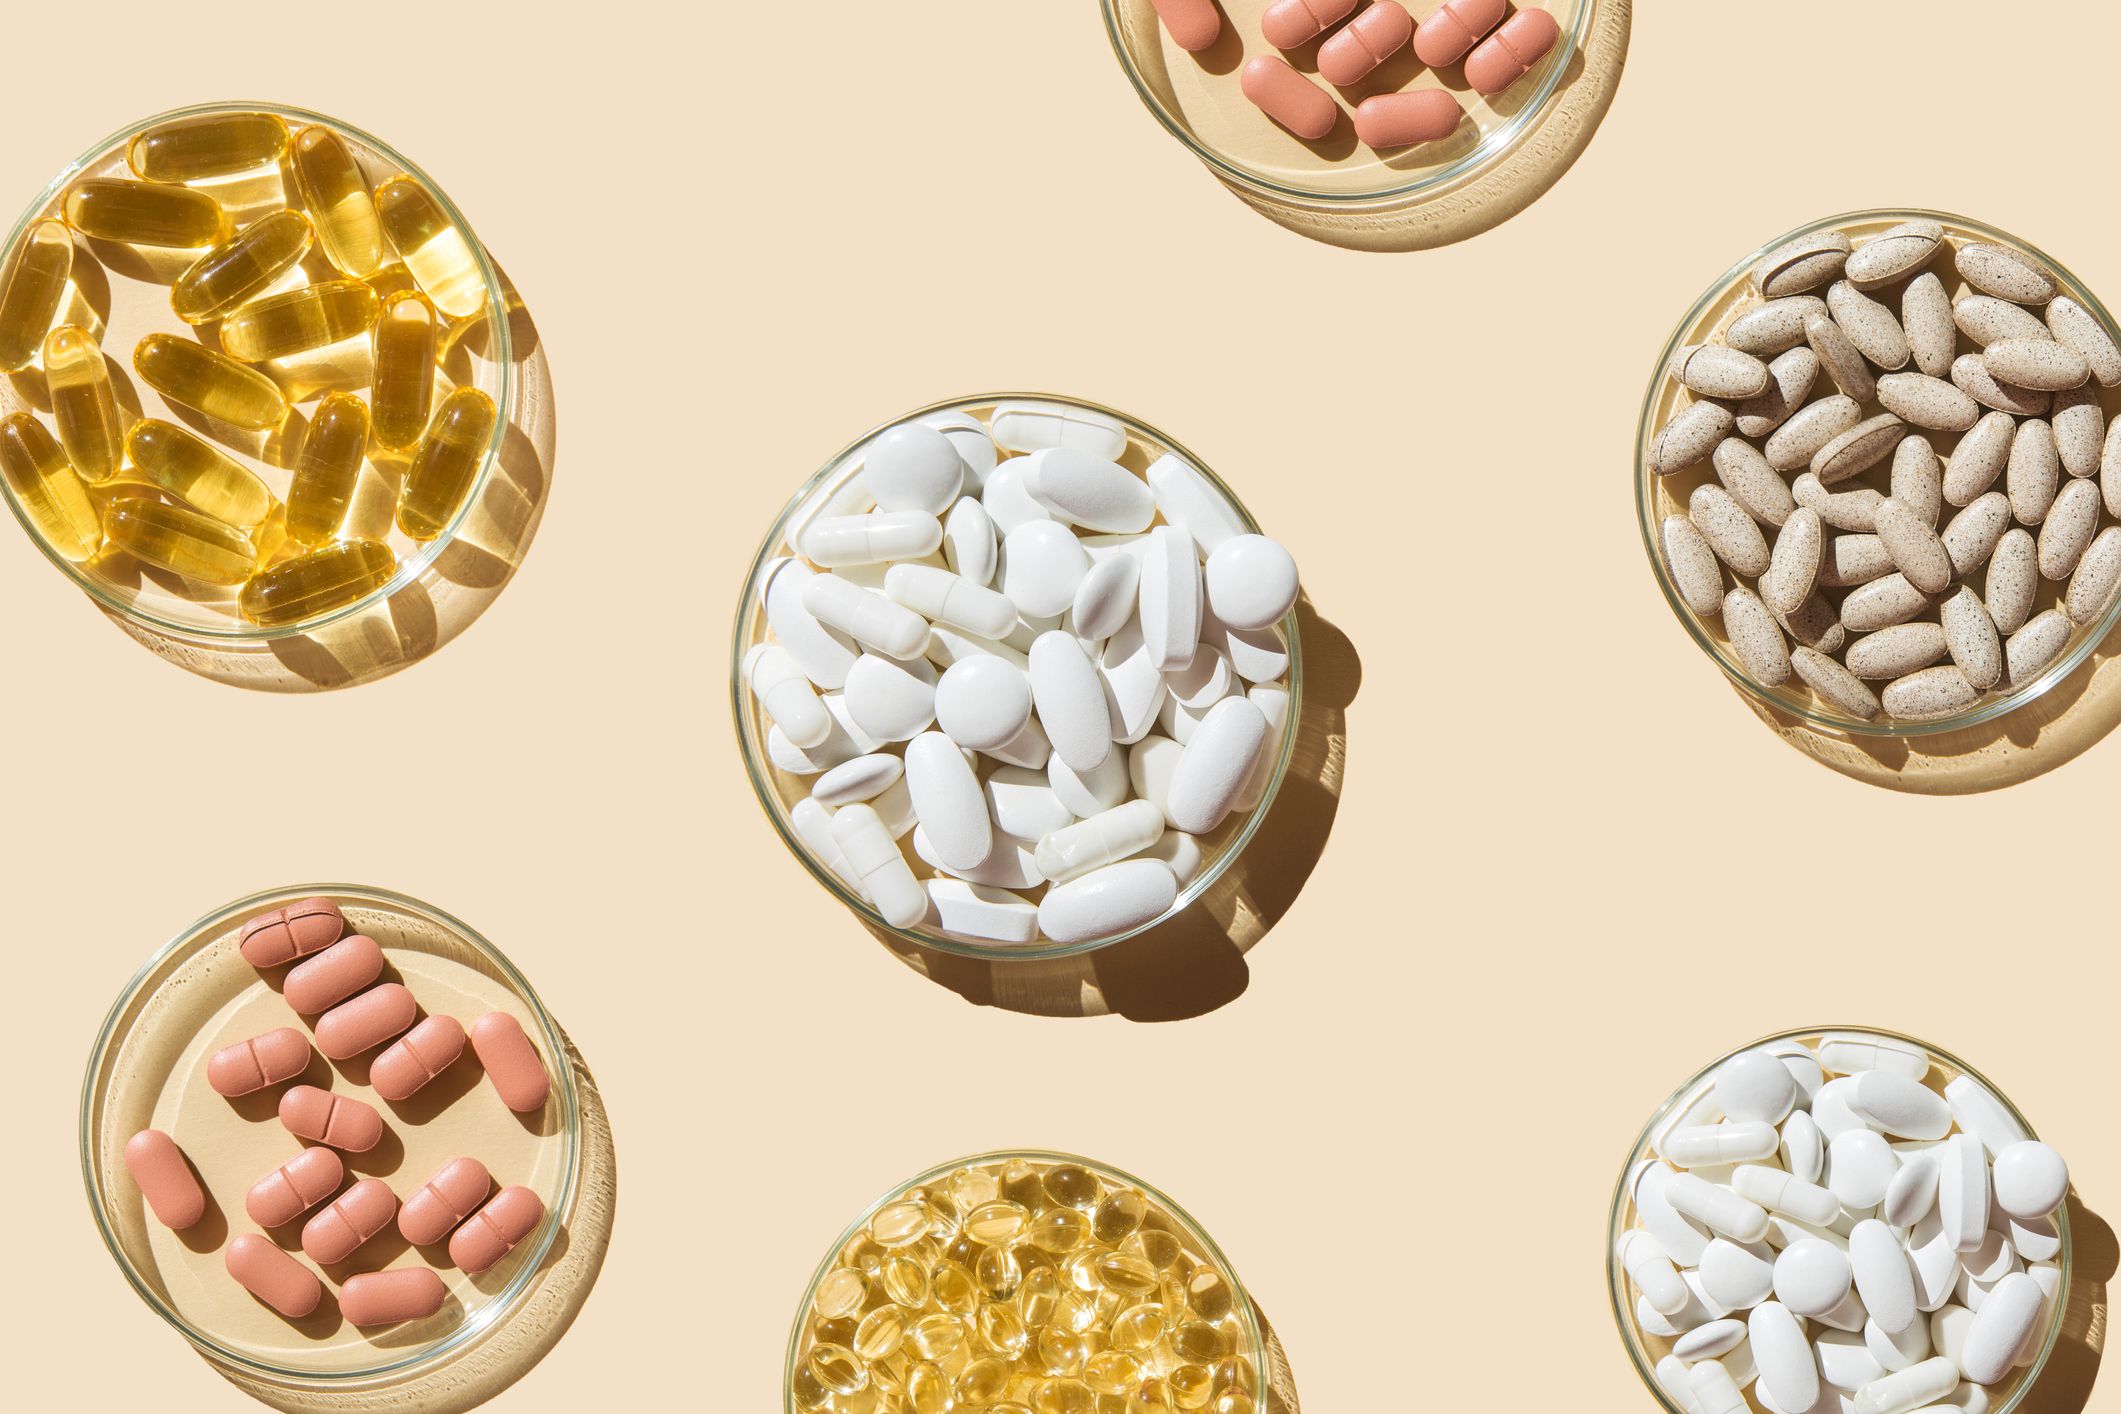 9 Vitamins For Immune System Support, According To An RD